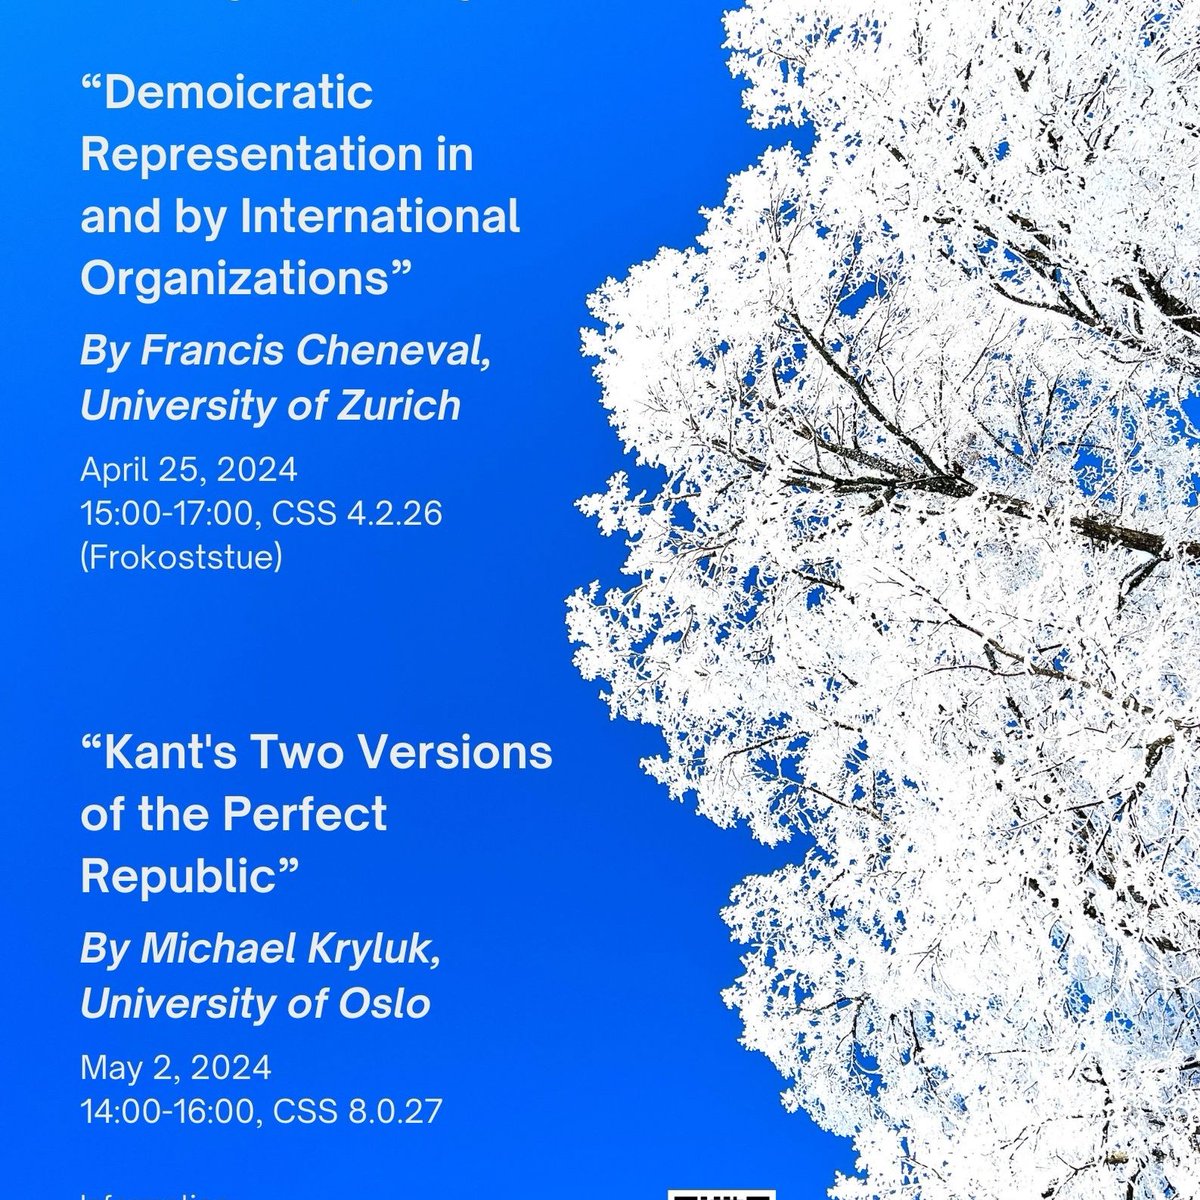 Thursday, May 2, at 14.00 @PolsciCph: 'Kant's Two Versions of the Perfect Republic' by Michael Kryluk (@UniOslo) in the Political Theory Seminars ➡️politicalscience.ku.dk/events/kants-t…